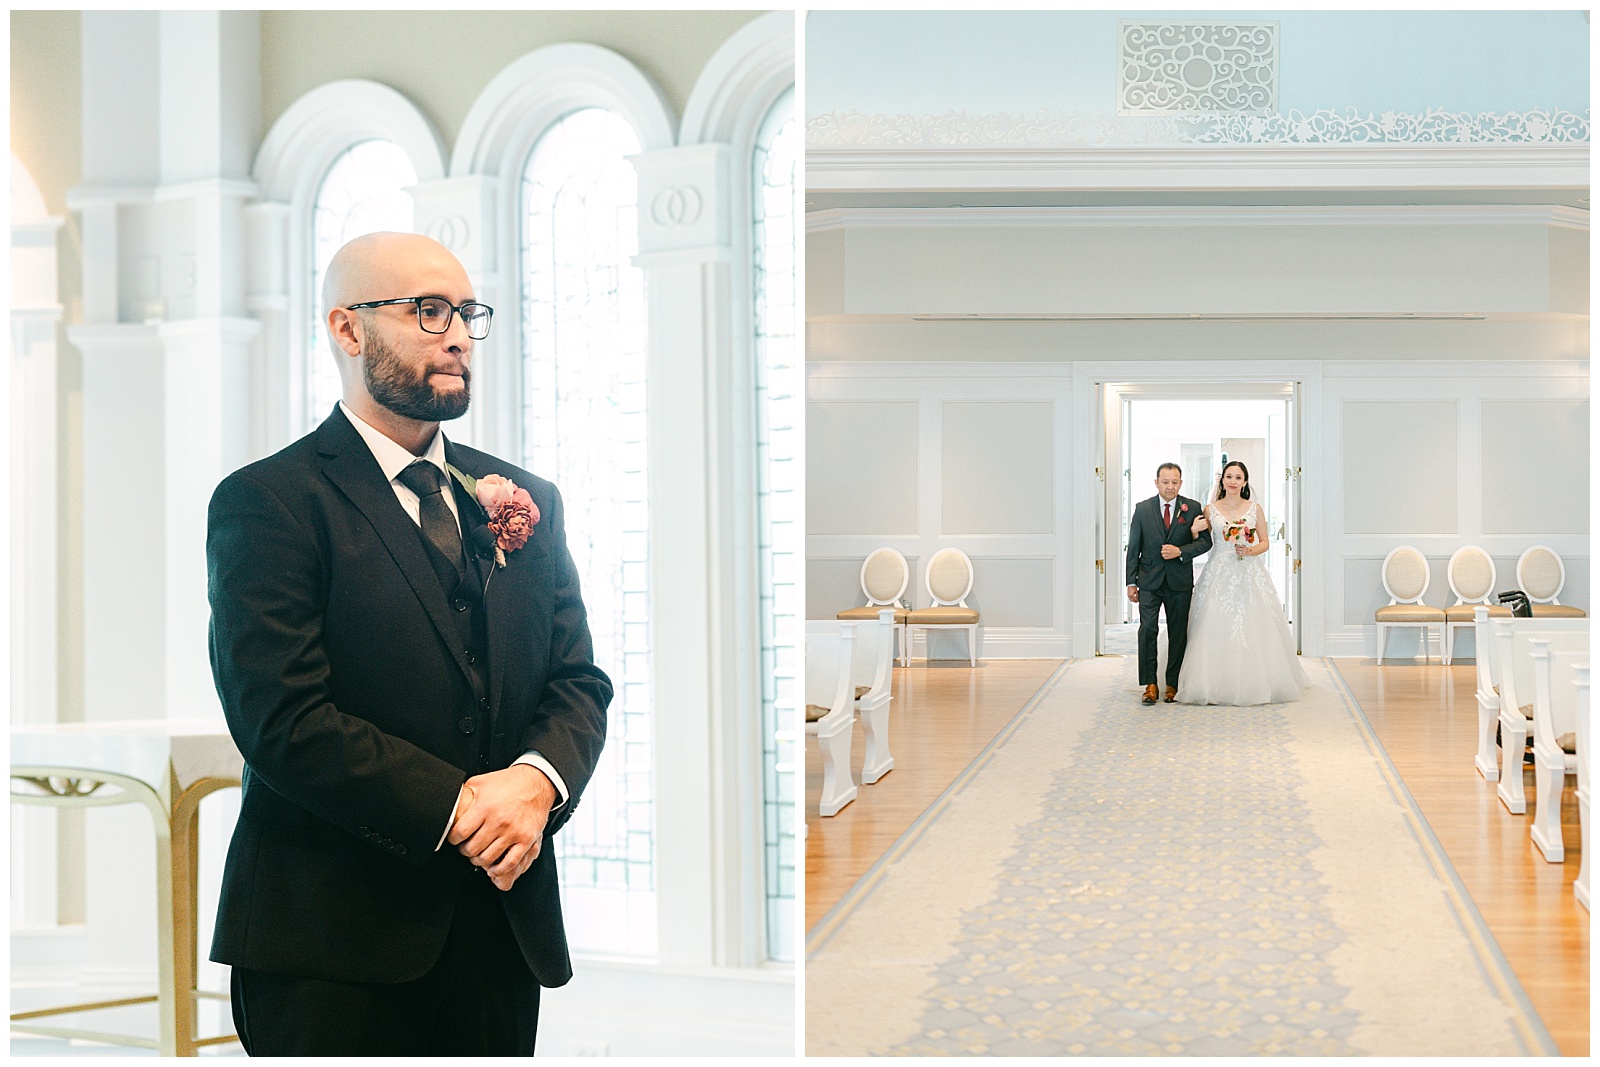 Left: Groom seeing his bride enter Disney's Wedding Pavilion for the first time after parting ways at the Riviera Resort
Right: Bride walked down the aisle by her father
By Elizabeth Kane Photography in Orlando Florida